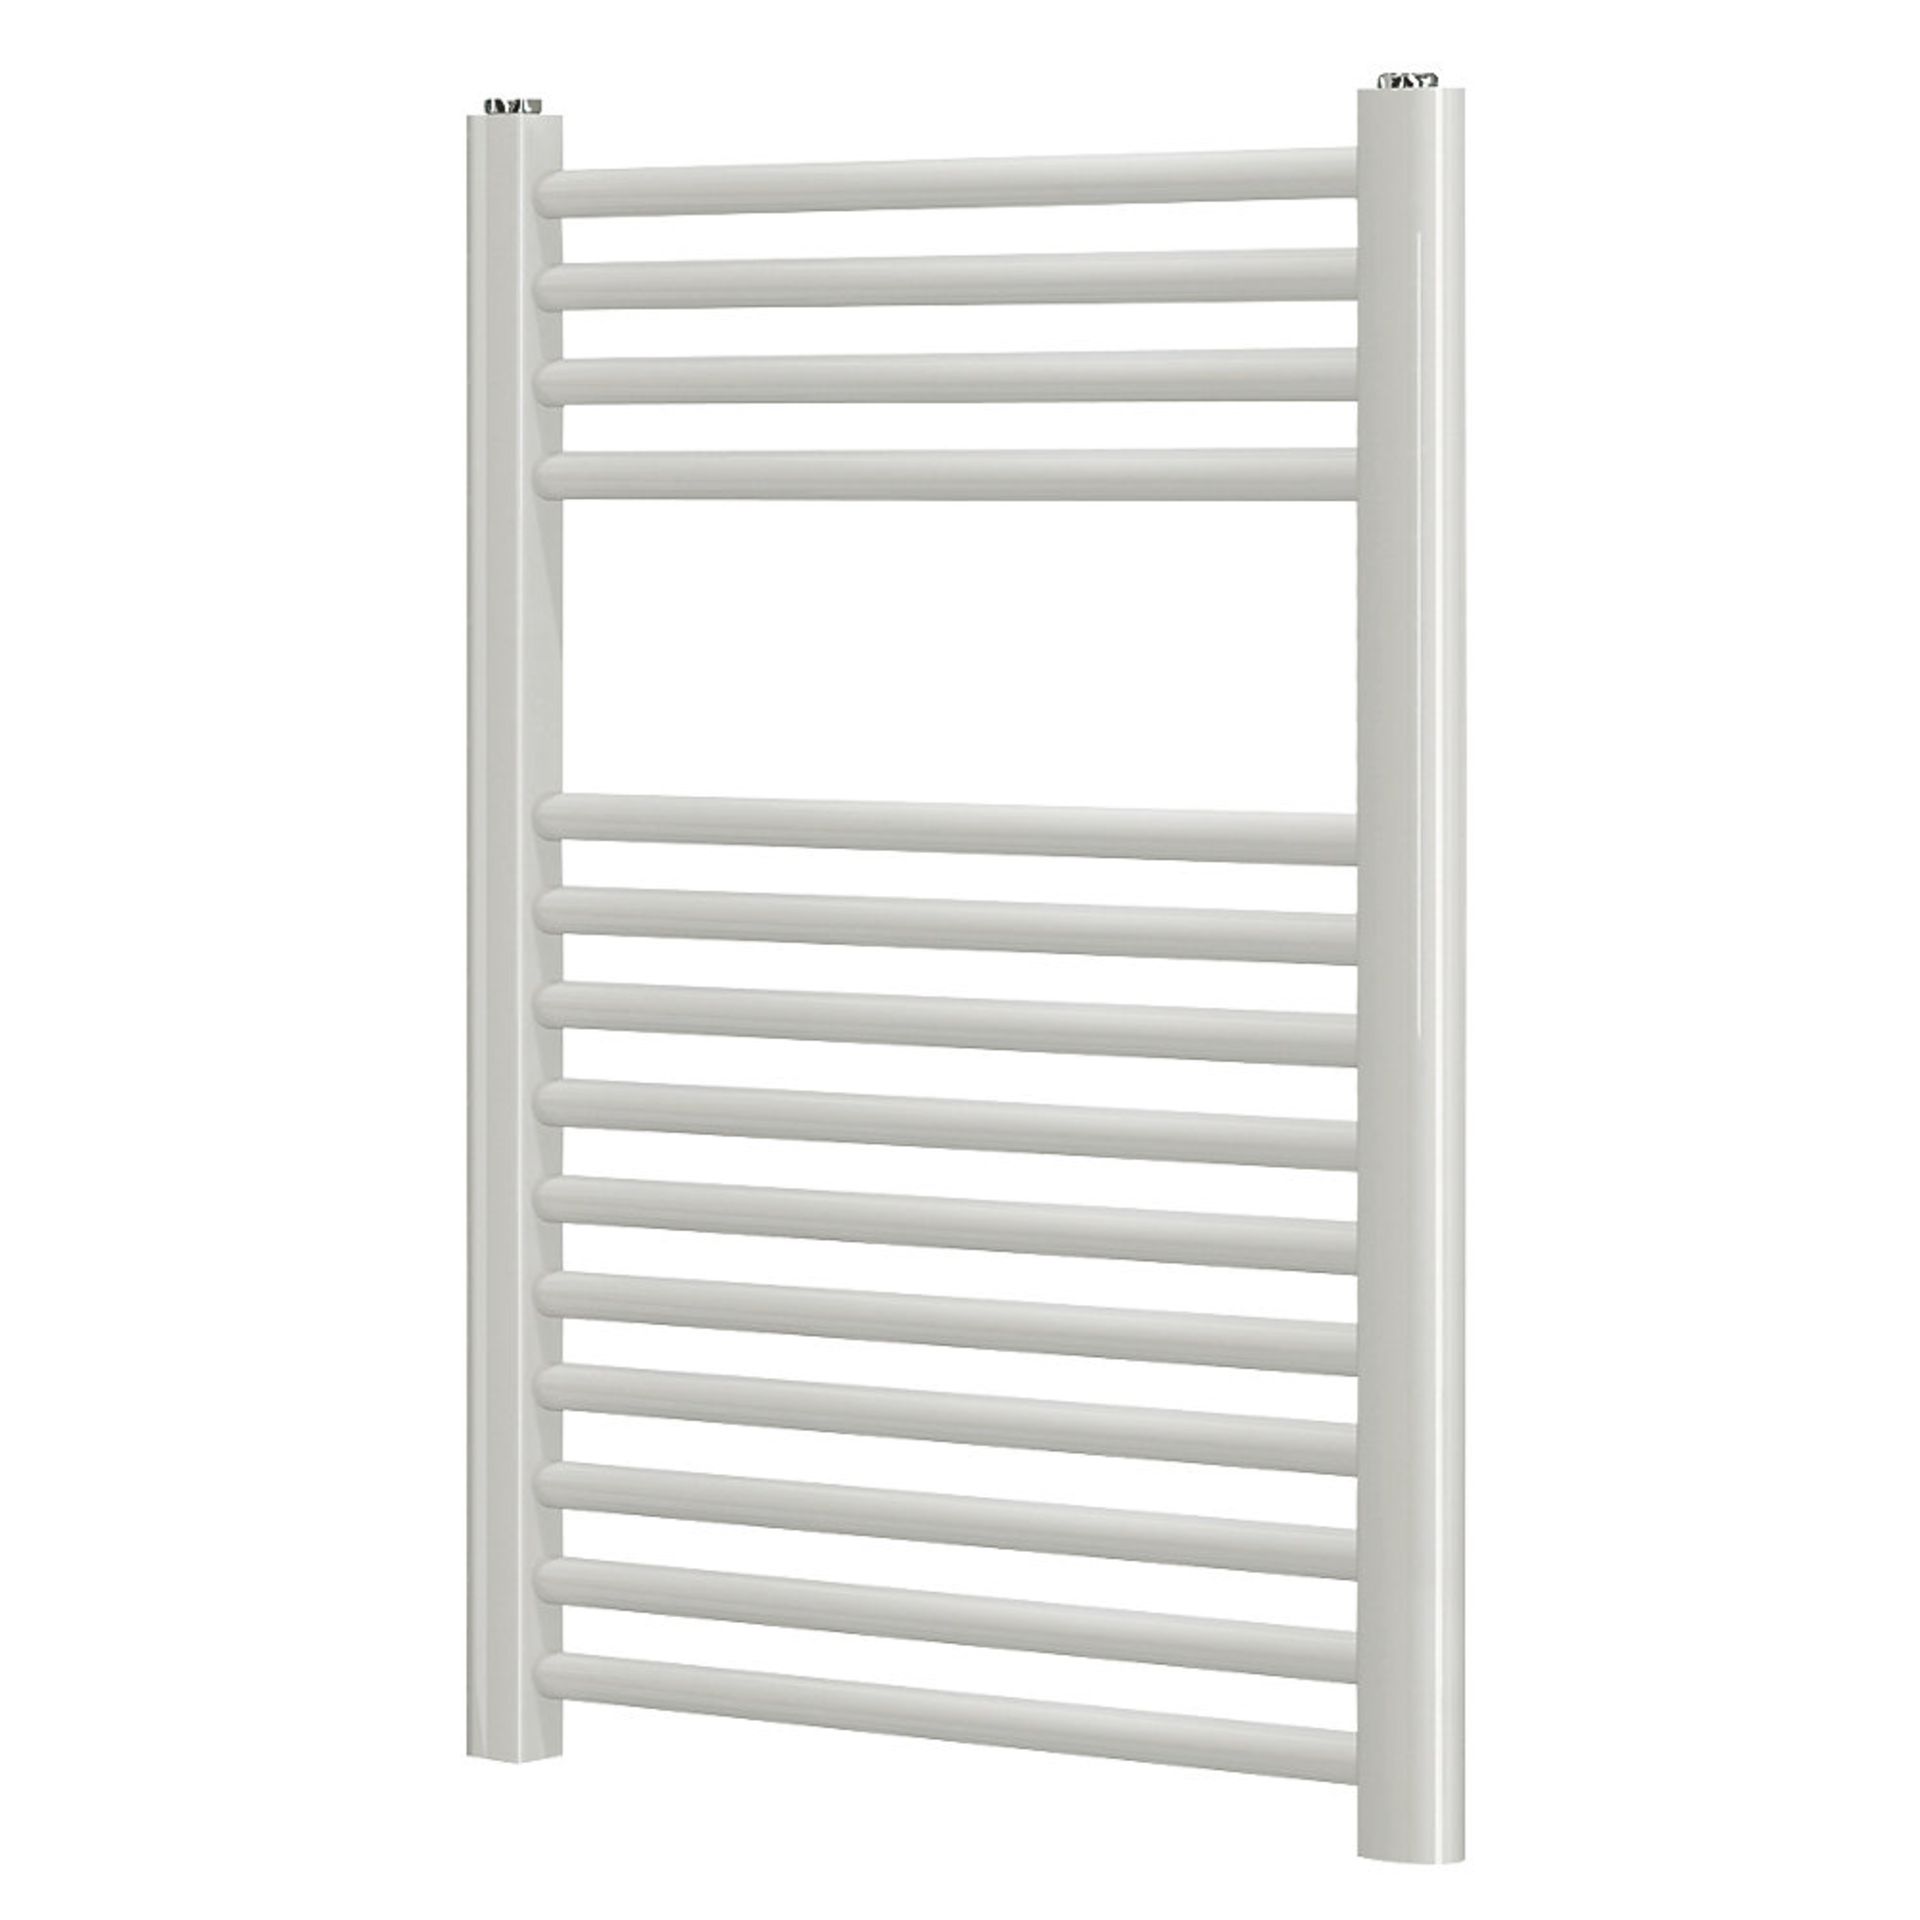 (Kl104) 700 x 400mm White Flat Towel Radiator. Flat Front Powder-Coated Mild Steel Construction. May